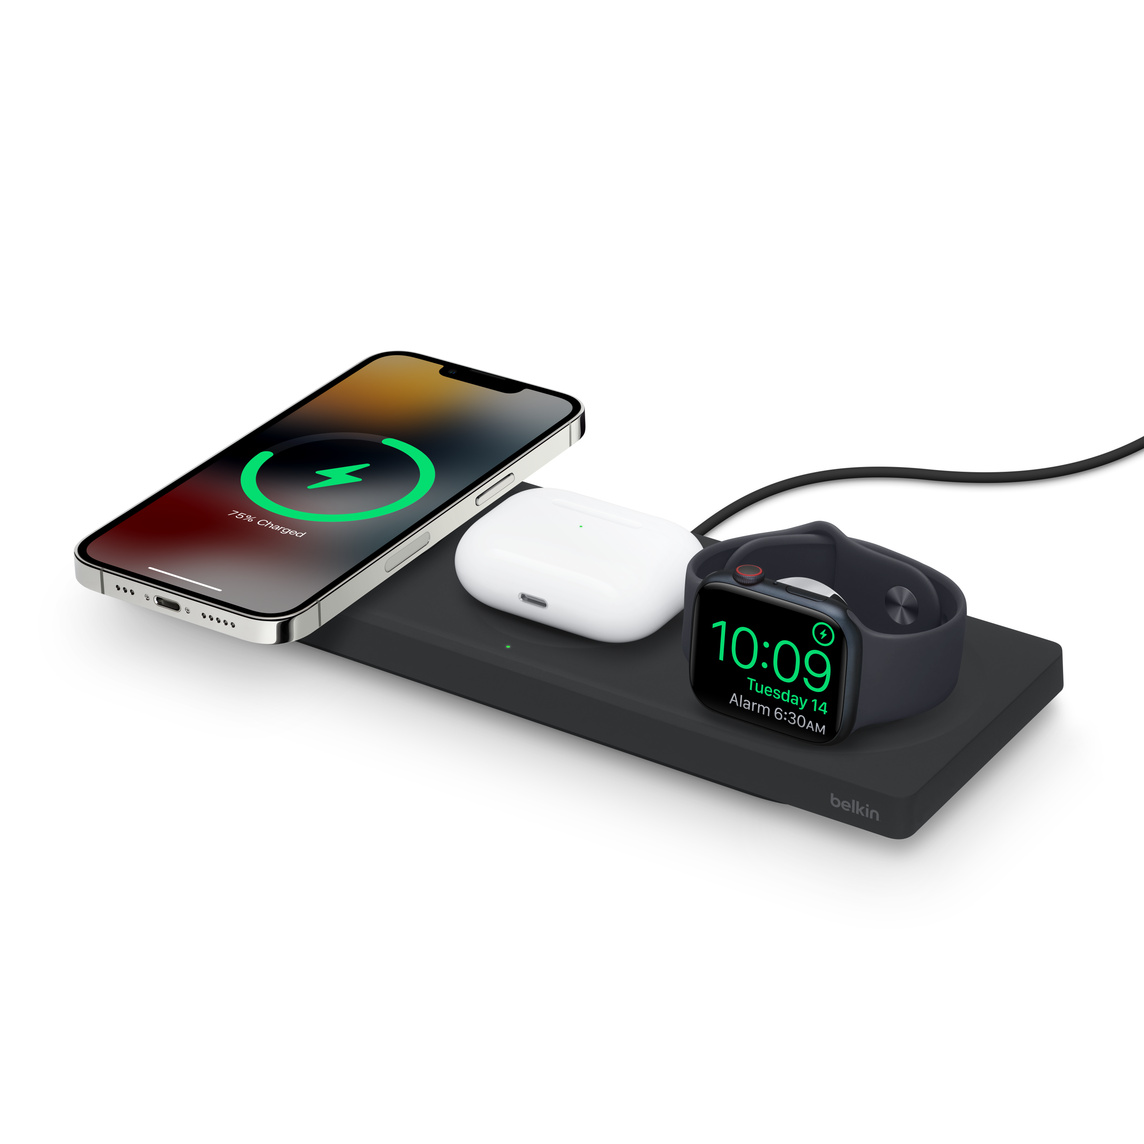 Belkin Boost Charge Pro 3-in-1 Wireless Charging Pad with MagSafeは、iPhone、AirPodsワイヤレス充電ケース、Apple Watchを同時に充電できる。